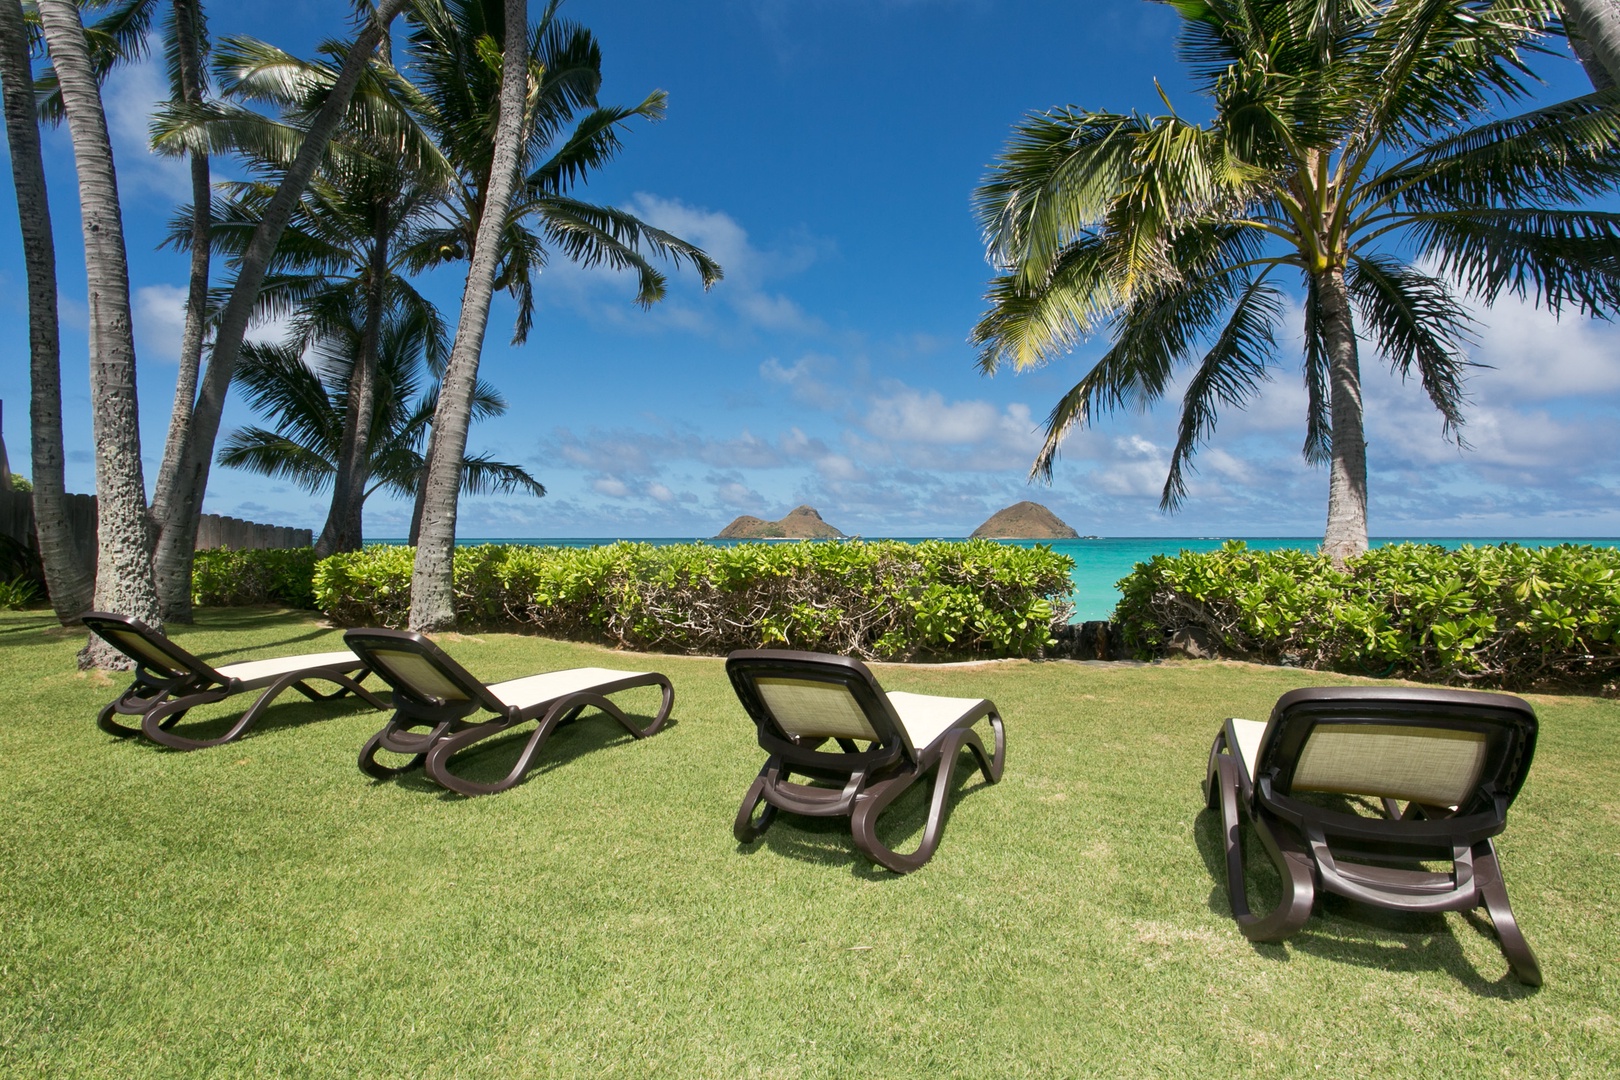 Kailua Vacation Rentals, Hale Melia* - Unwind on our yard's sun loungers and feel the tropical breeze.